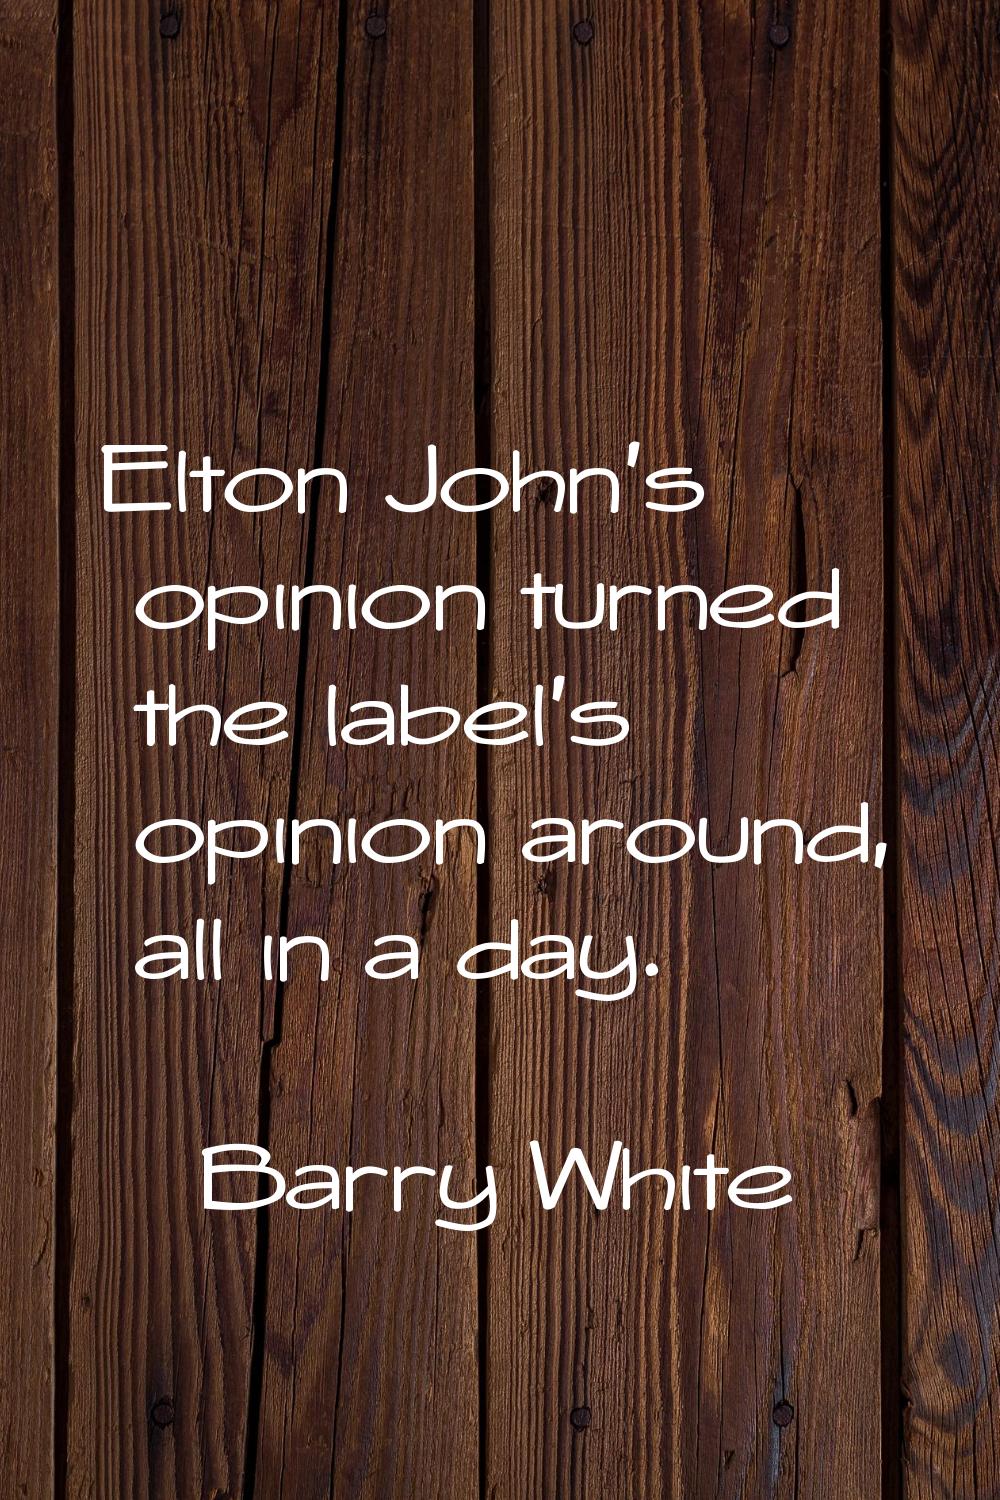 Elton John's opinion turned the label's opinion around, all in a day.